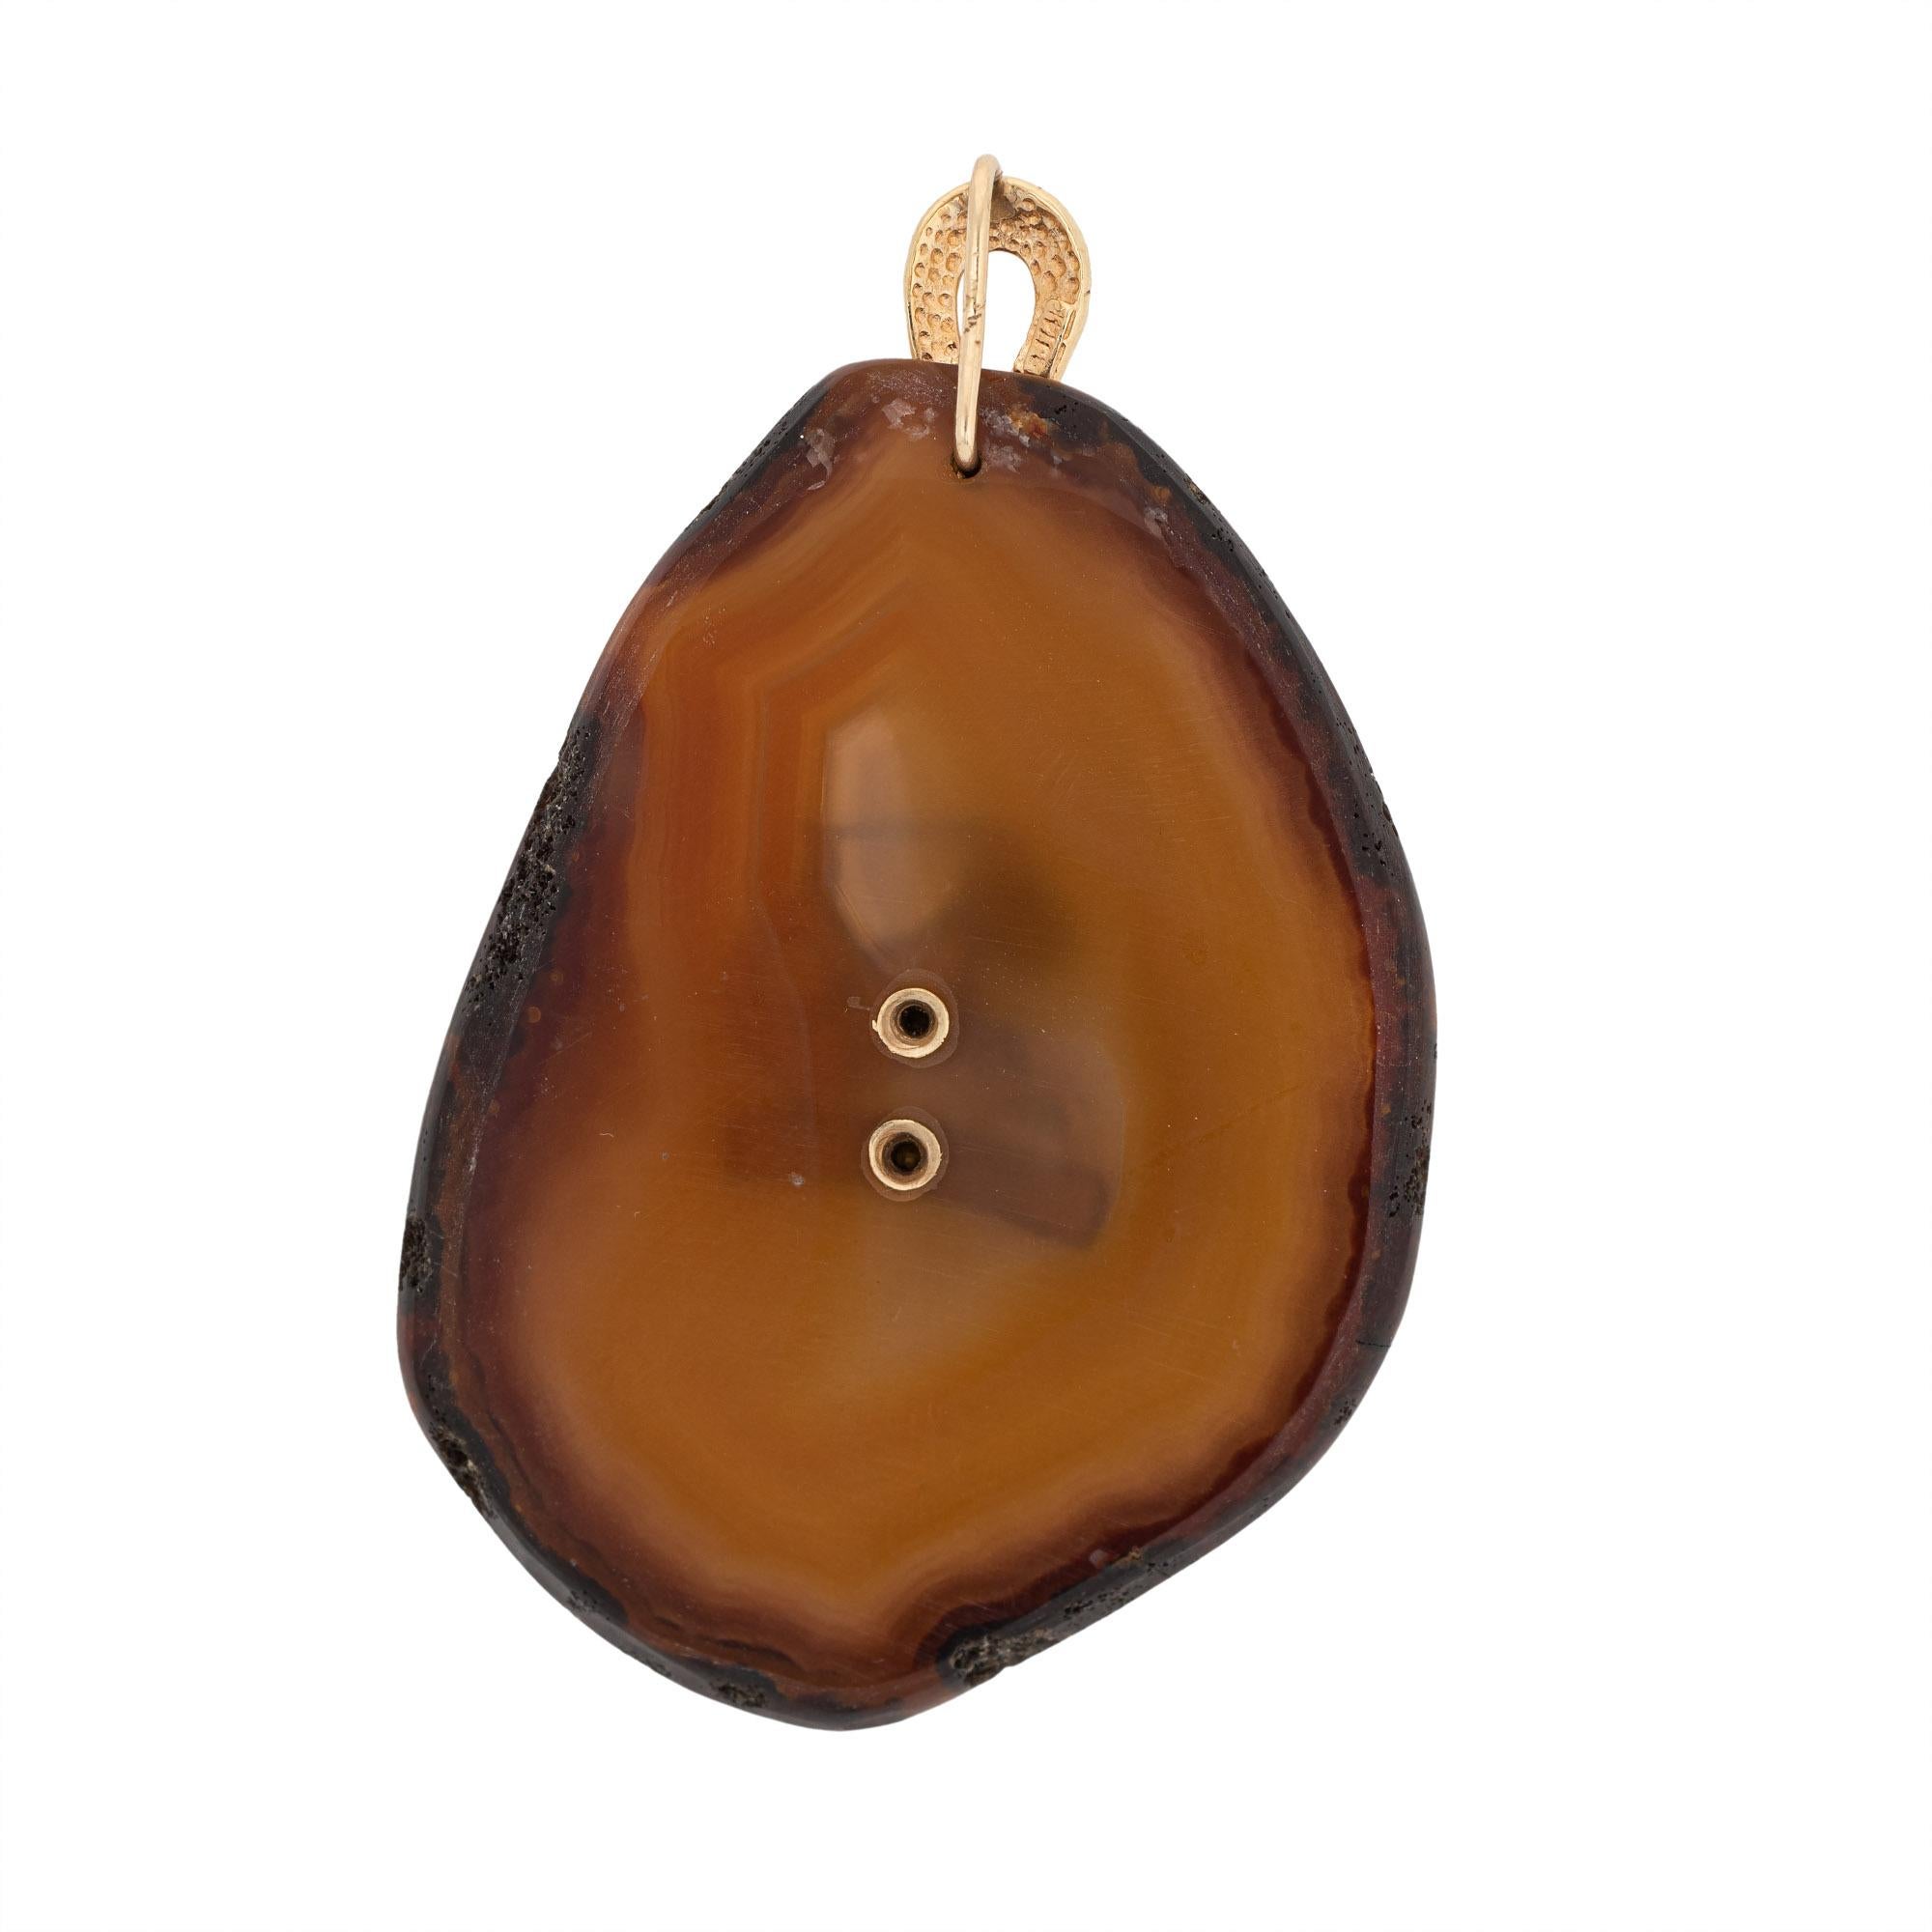 Finely detailed large Capricorn agate medallion pendant crafted in 14k yellow gold (circa 1970s).  

A large slice of freeform cut agate features a 14k gold set Capricorn zodiac center. The elaborate and bold design is a great example of 70s era